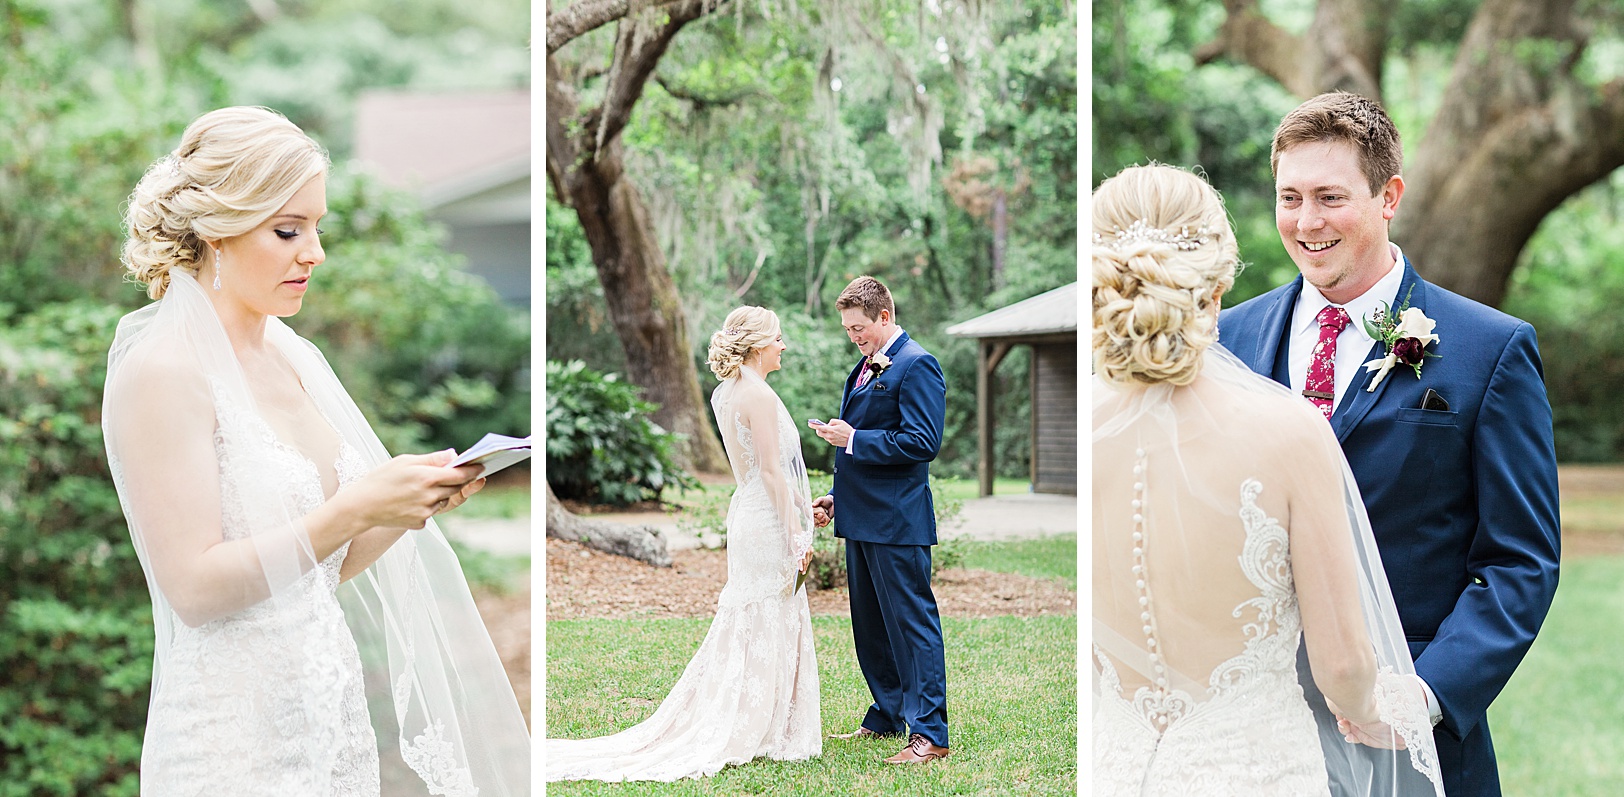 Intimate Vows During First Look | Kaitlin Scott Photography